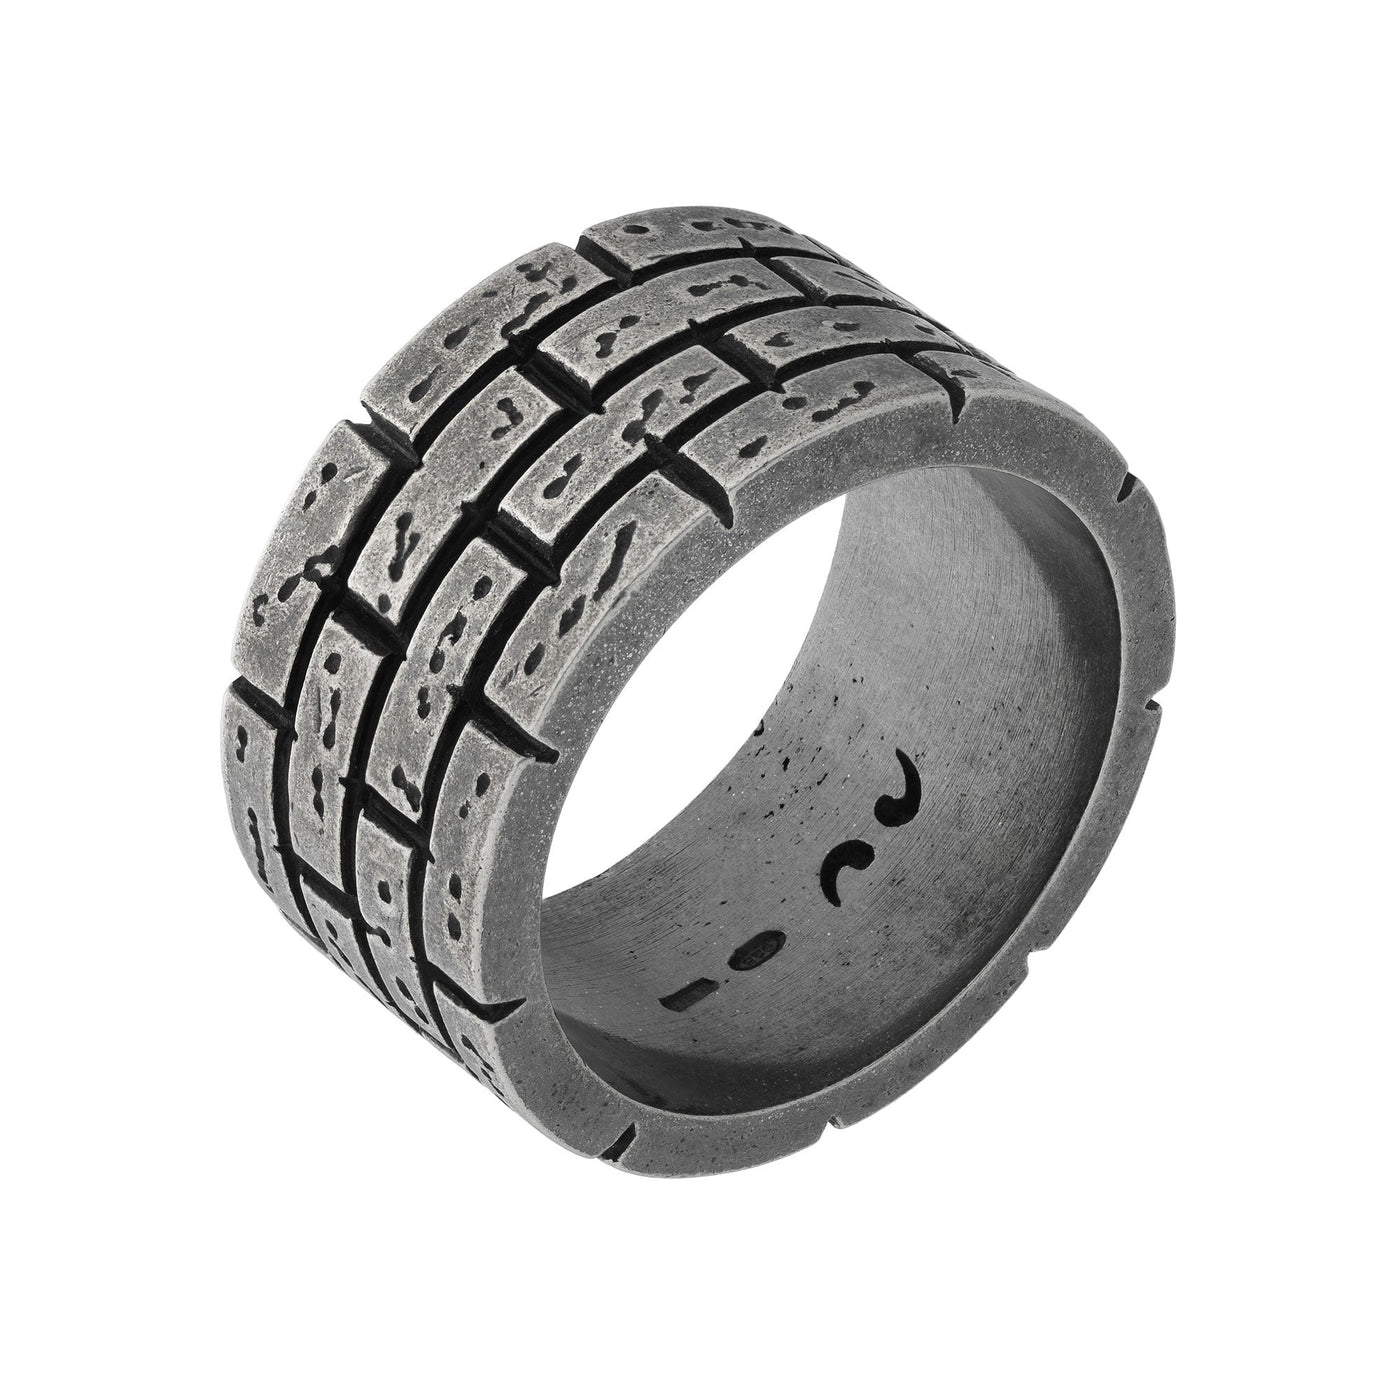 MURALES Oxidized Silver Wide Ring with Black Enamel